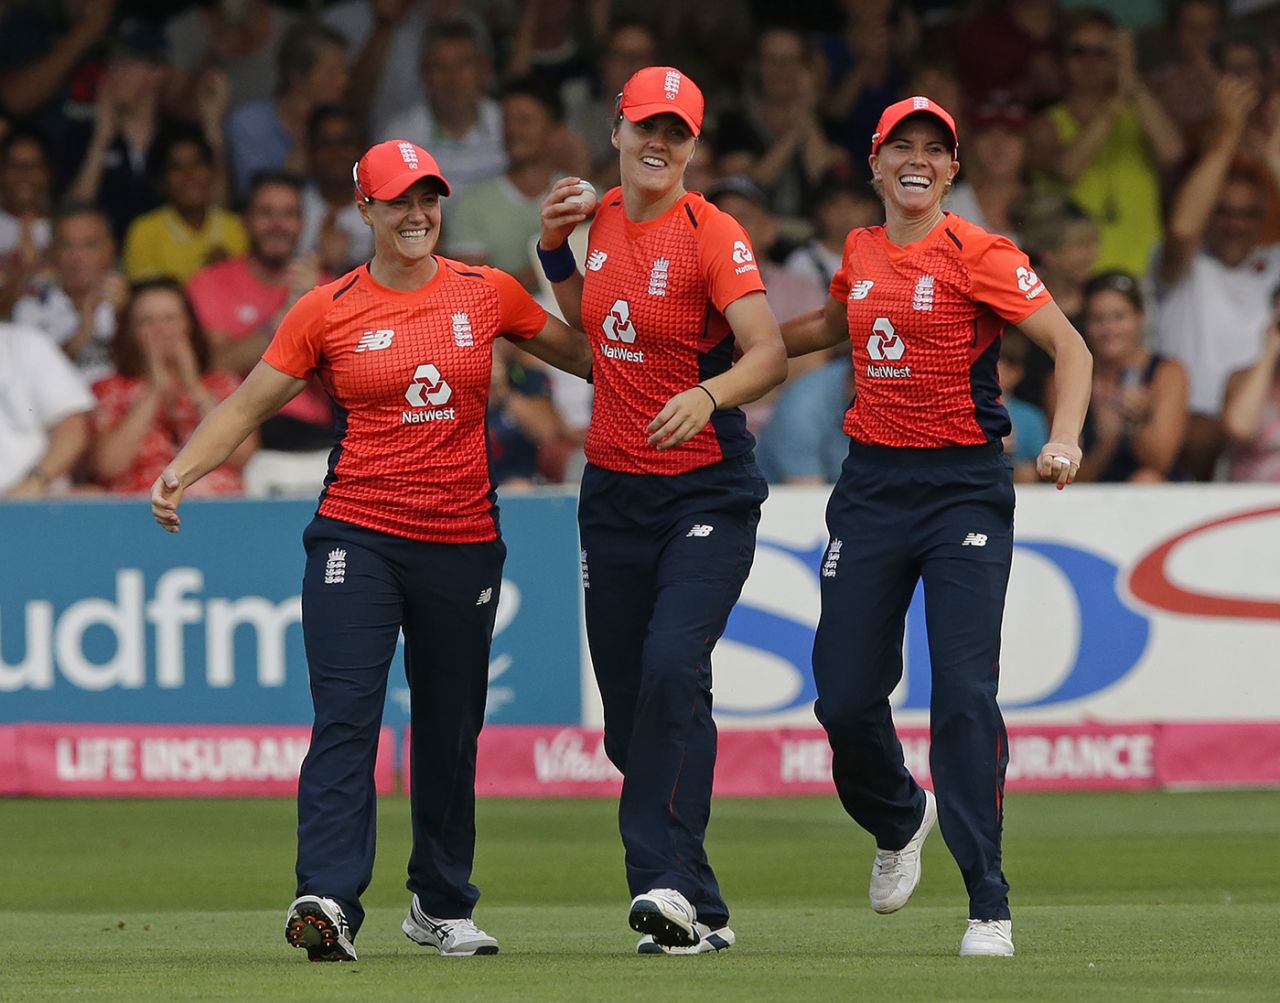 Nat Sciver celebrates after taking an acrobatic catch, England v Australia, 1st women's T20I, Chelmsford, July 26, 2019